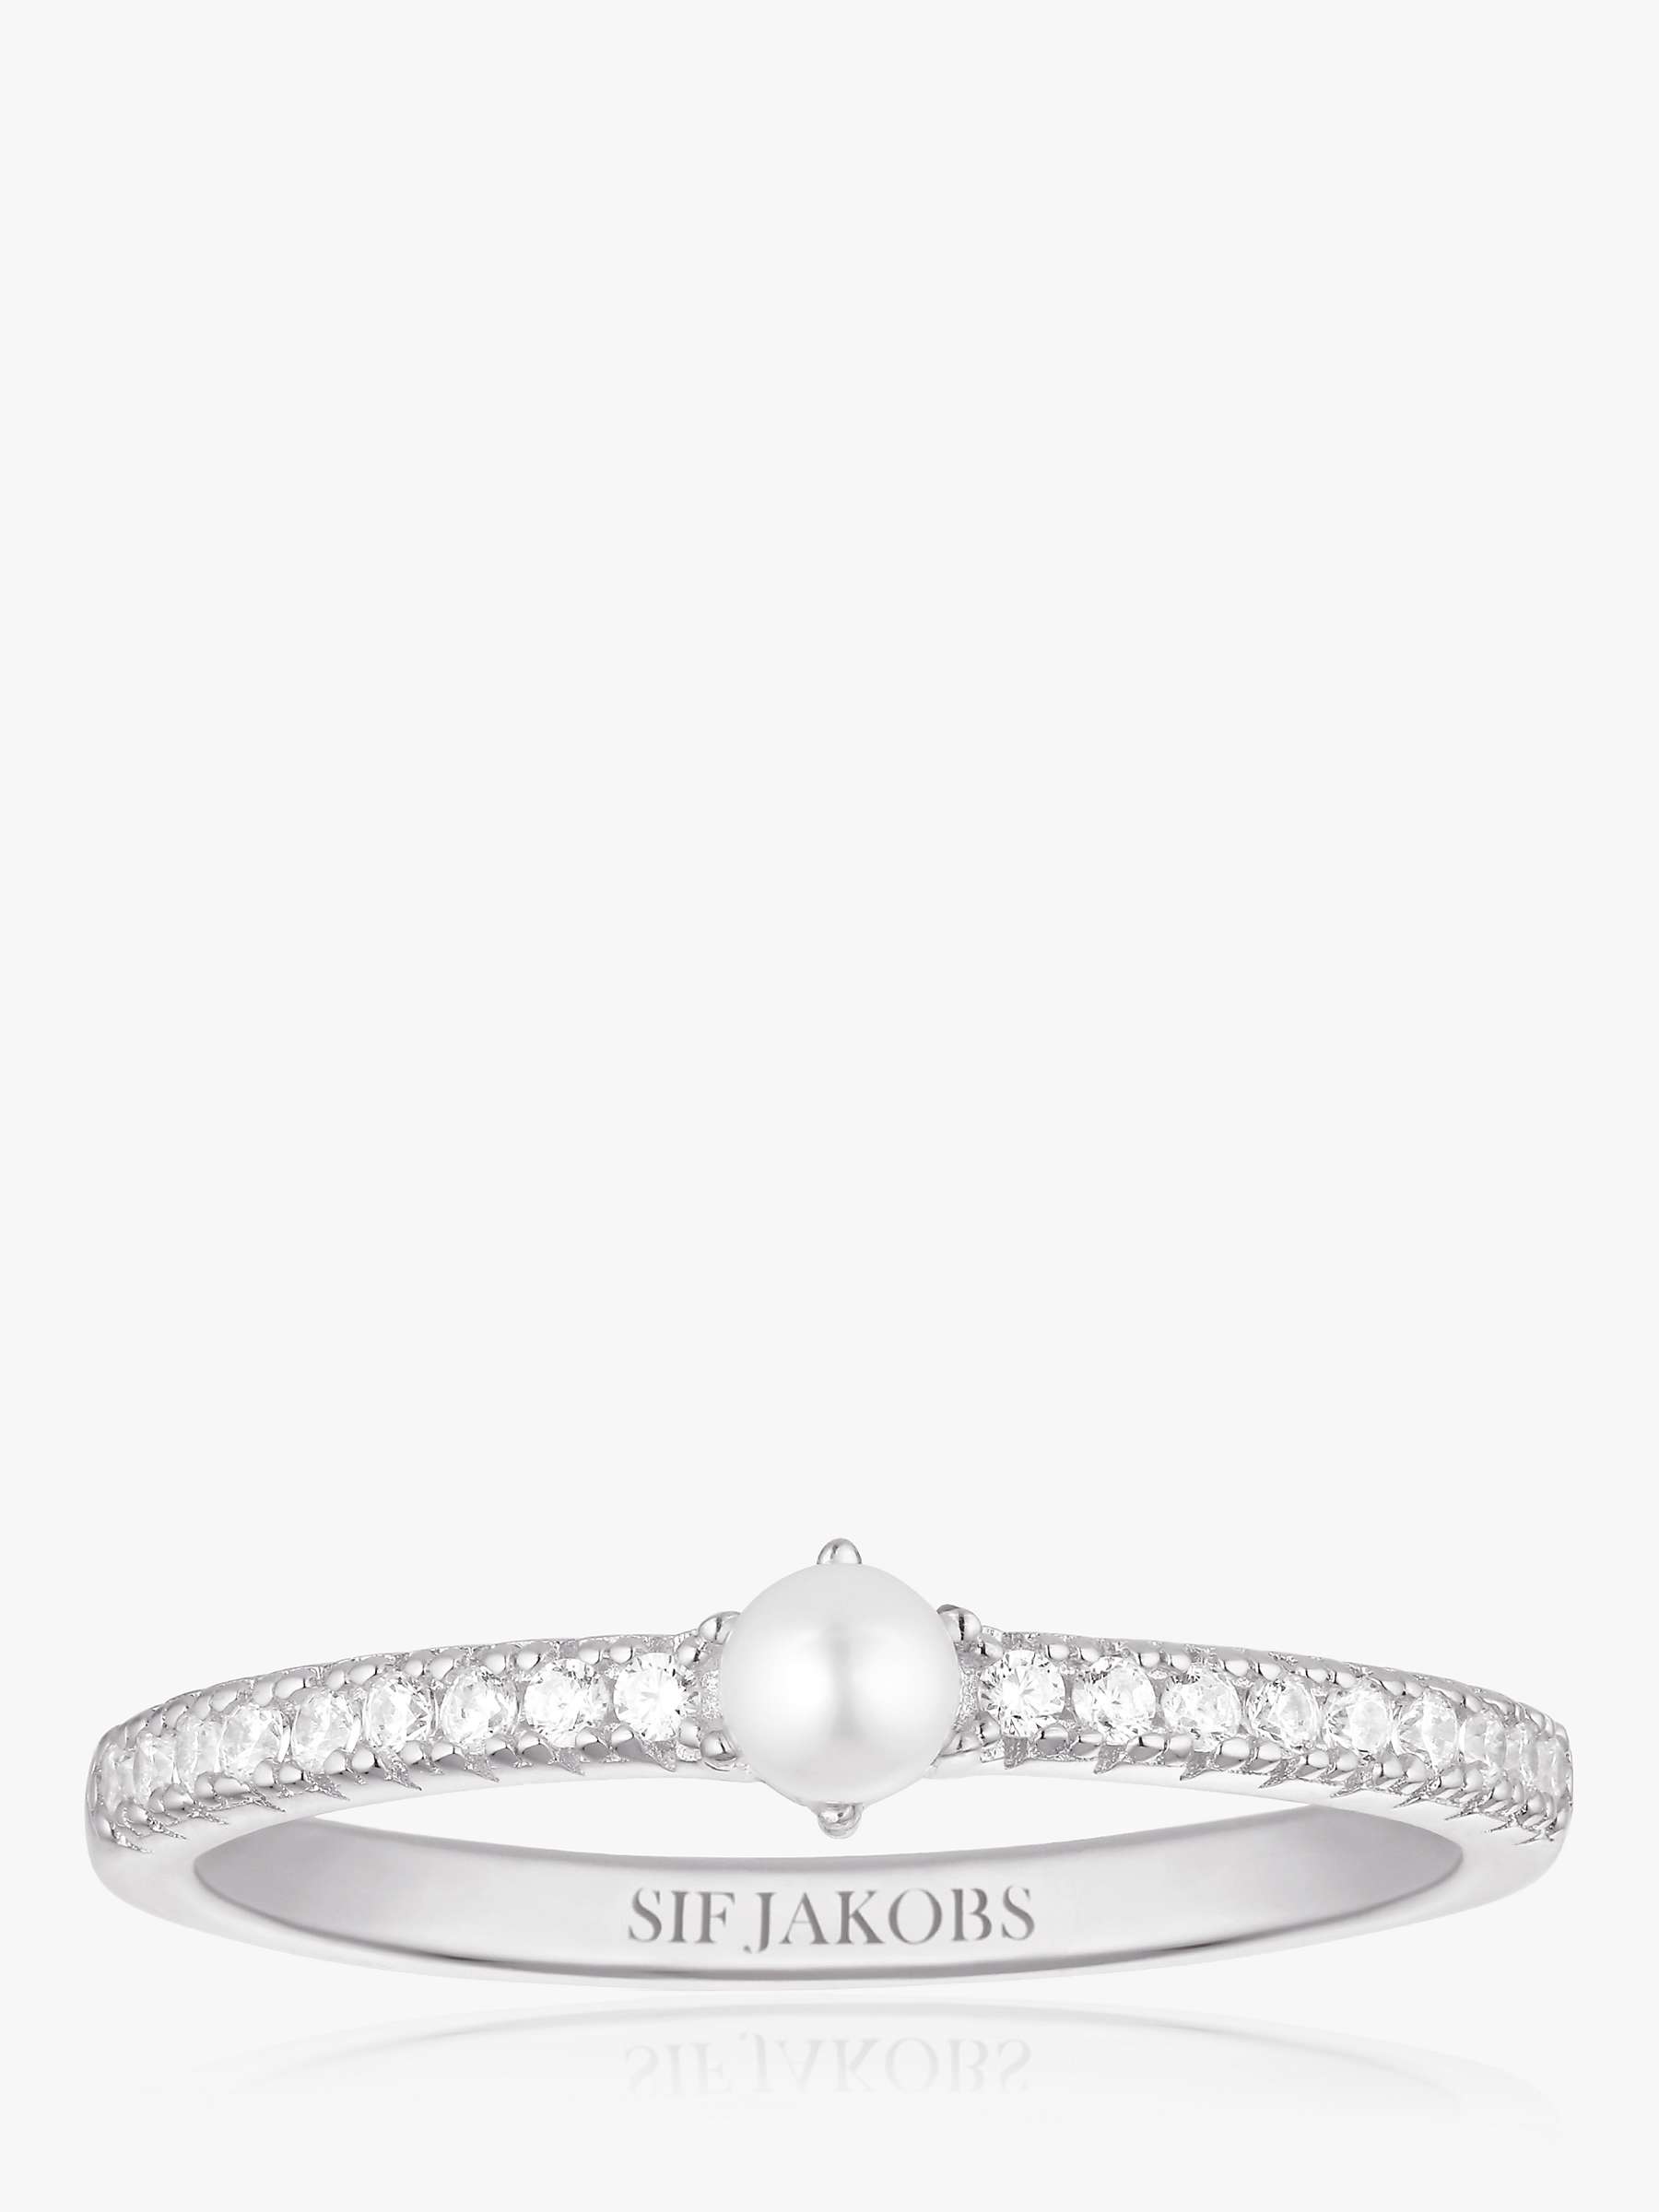 Buy Sif Jakobs Jewellery Pearl Cubic Zirconia Cocktail Ring, Silver Online at johnlewis.com